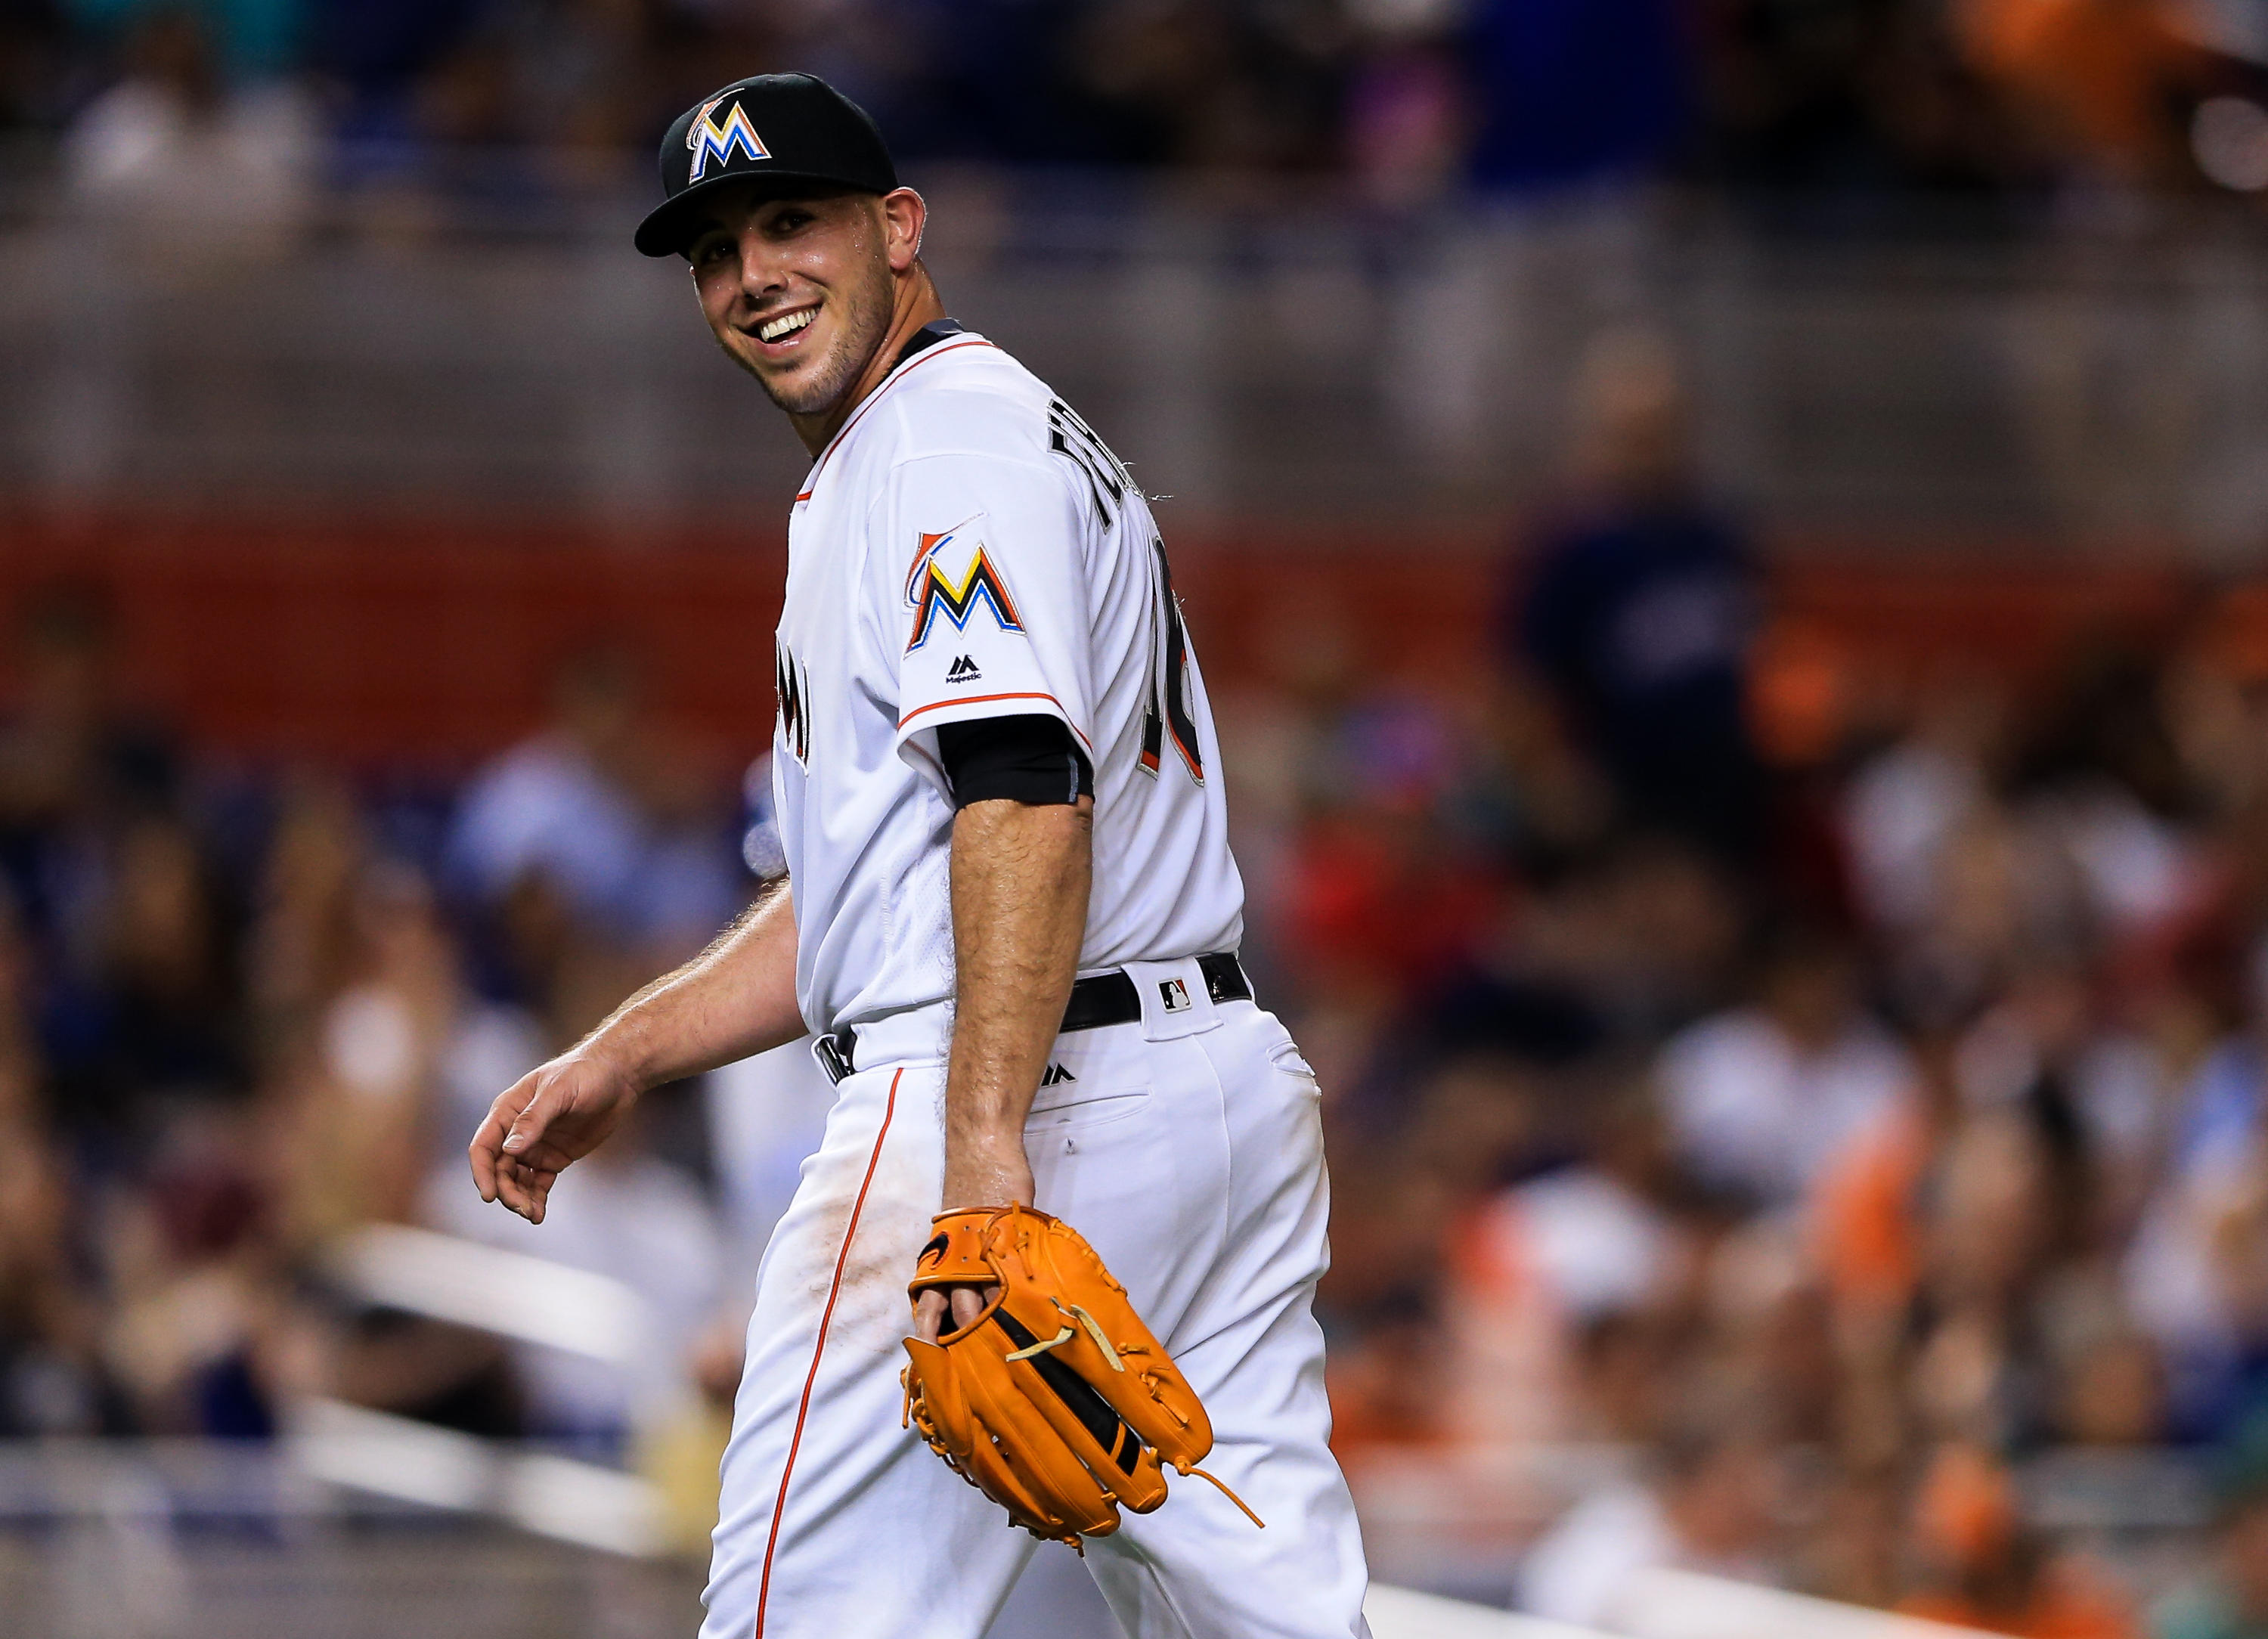 A lot of pain” – Miami Marlins cope with Jose Fernandez's death